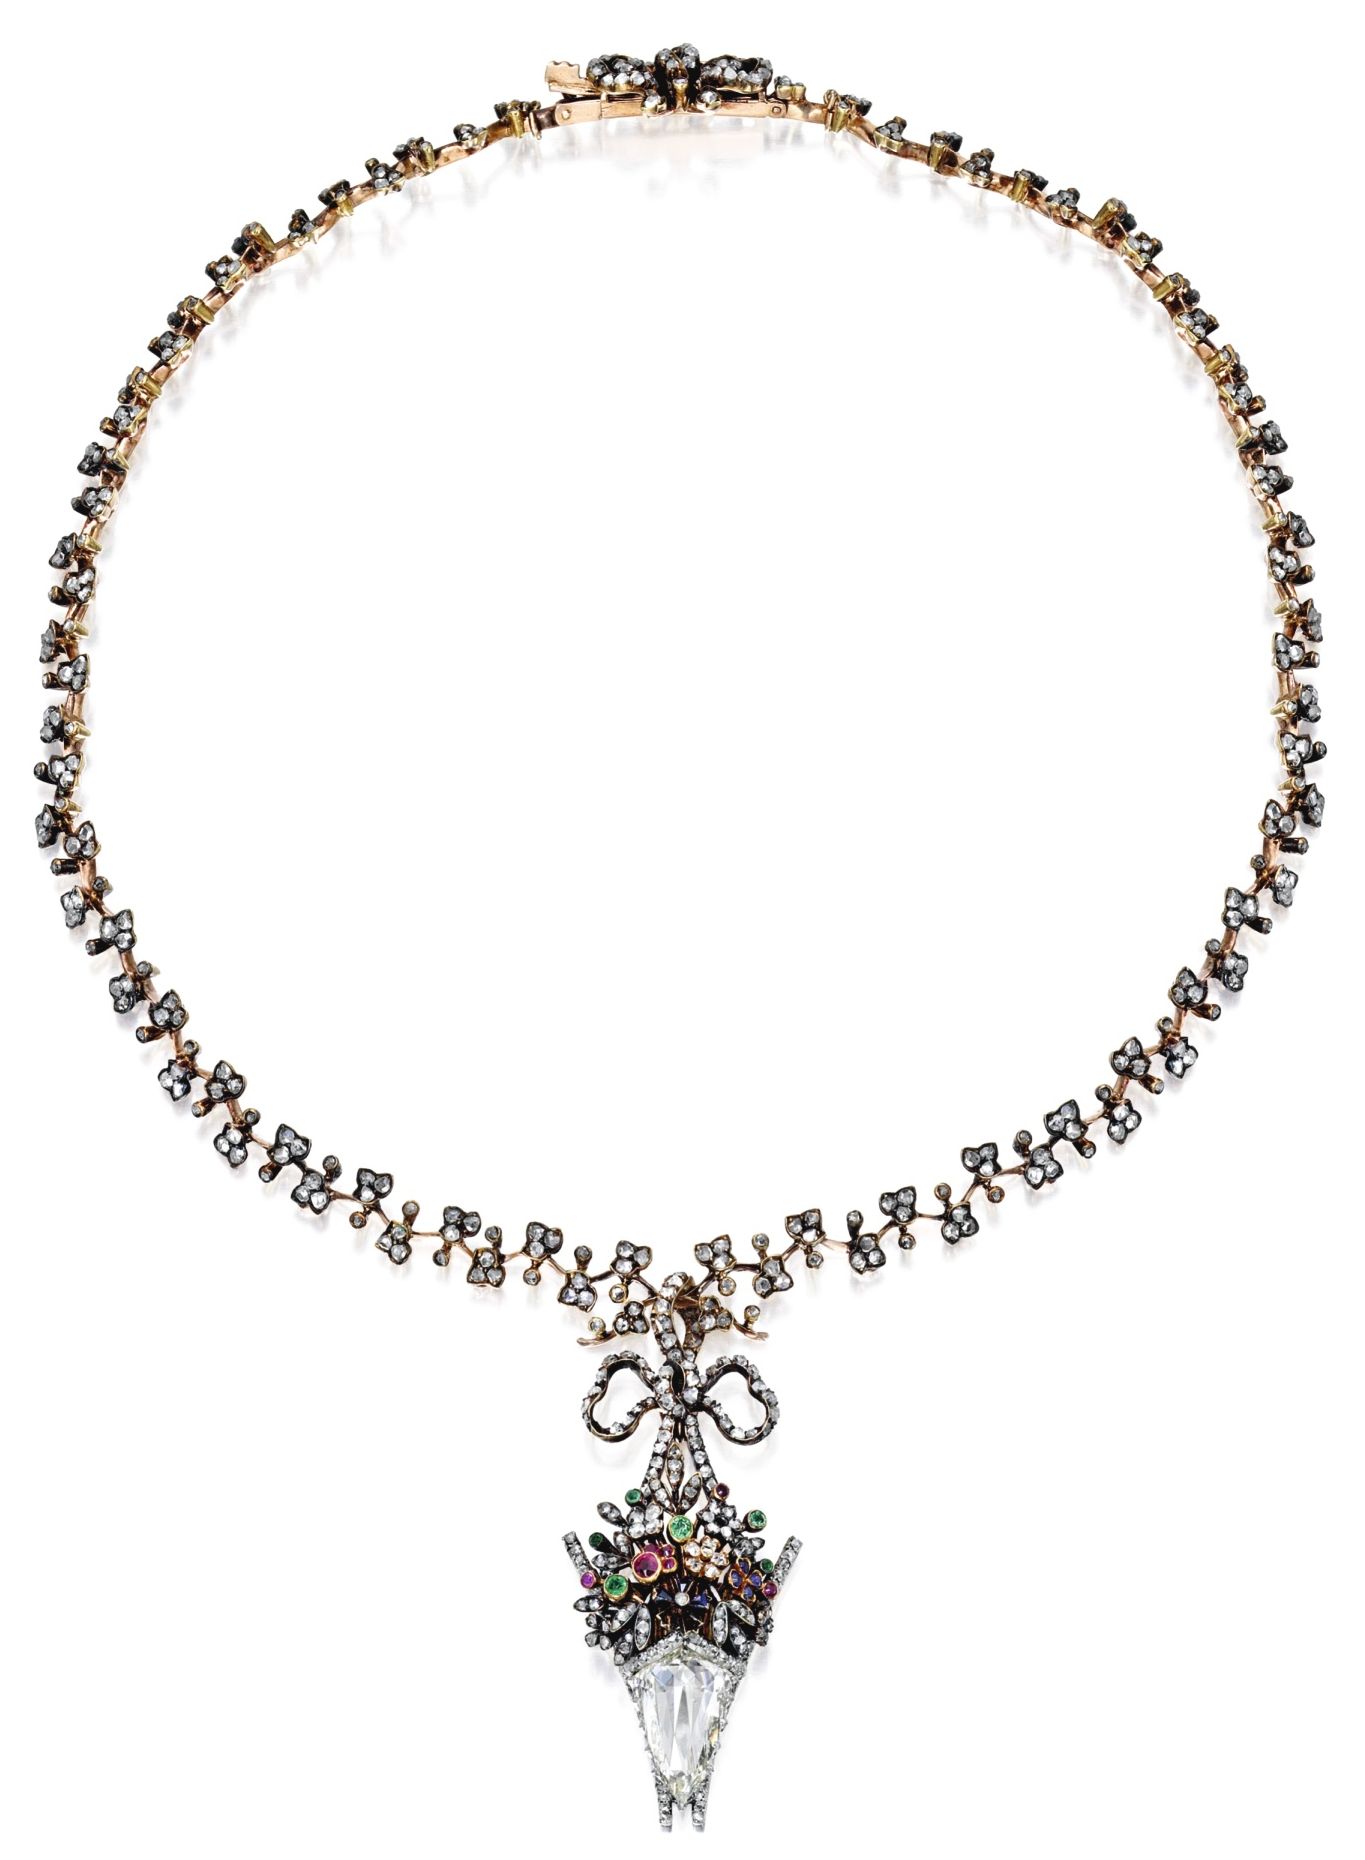 Lot 66 - Silver-Topped Gold, Diamond and Colored Stone Necklace, Frédéric Boucheron, Paris